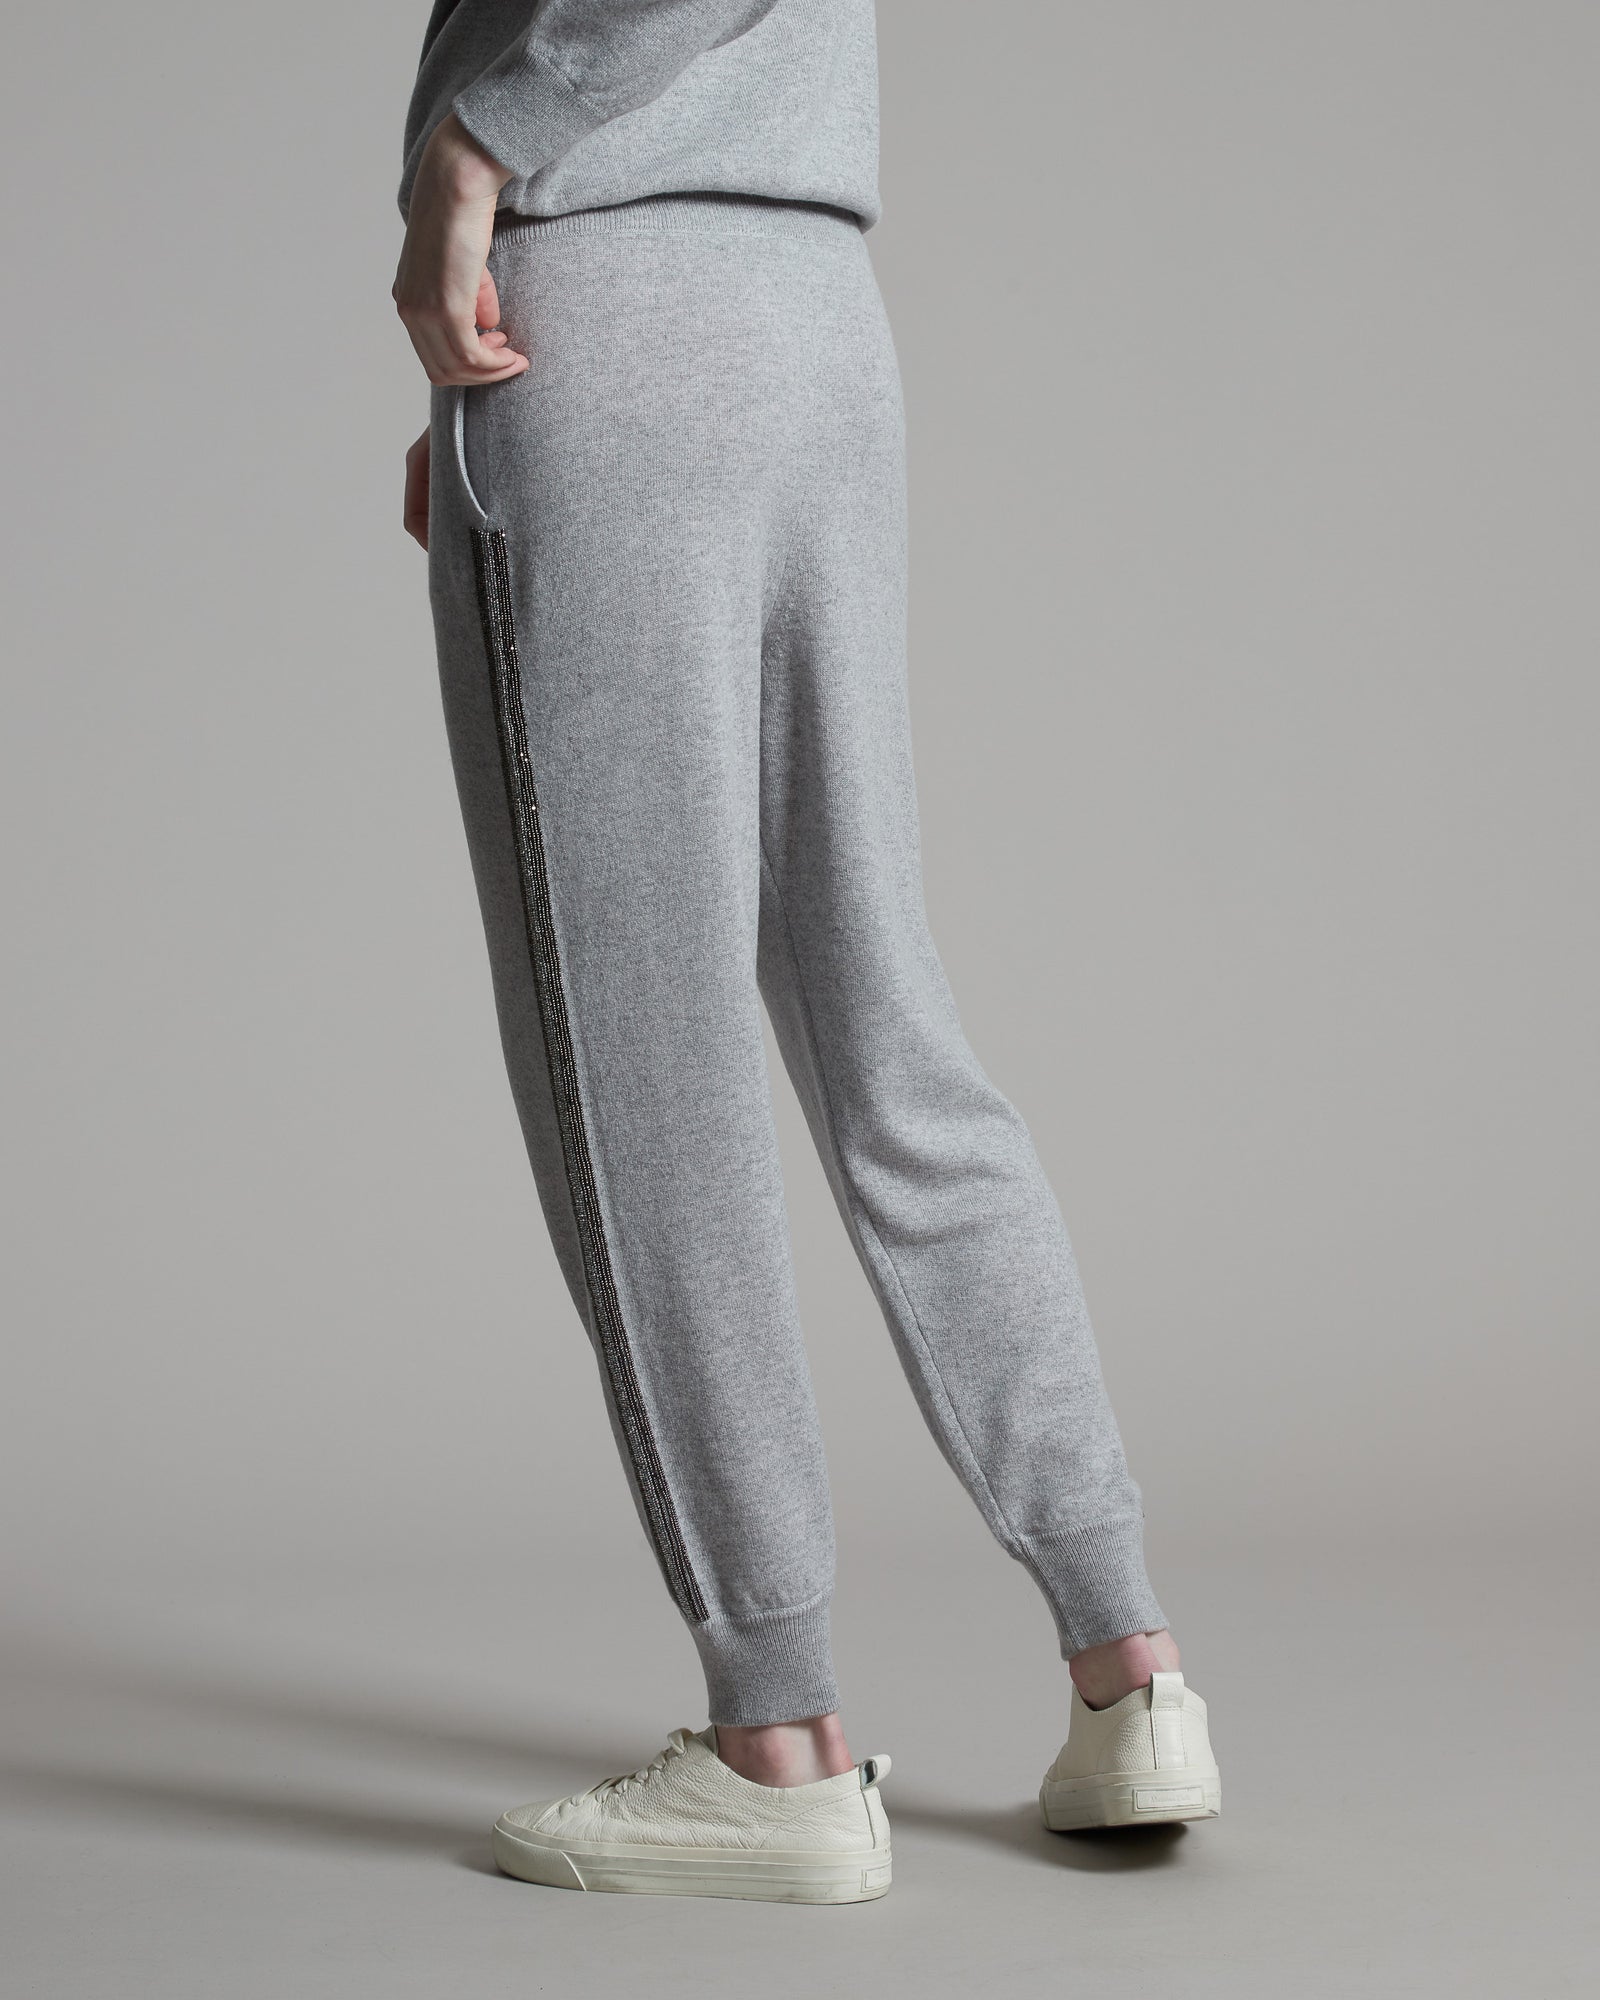 Grey Kid Cashmere jogging pants with sparkling embroidered brands